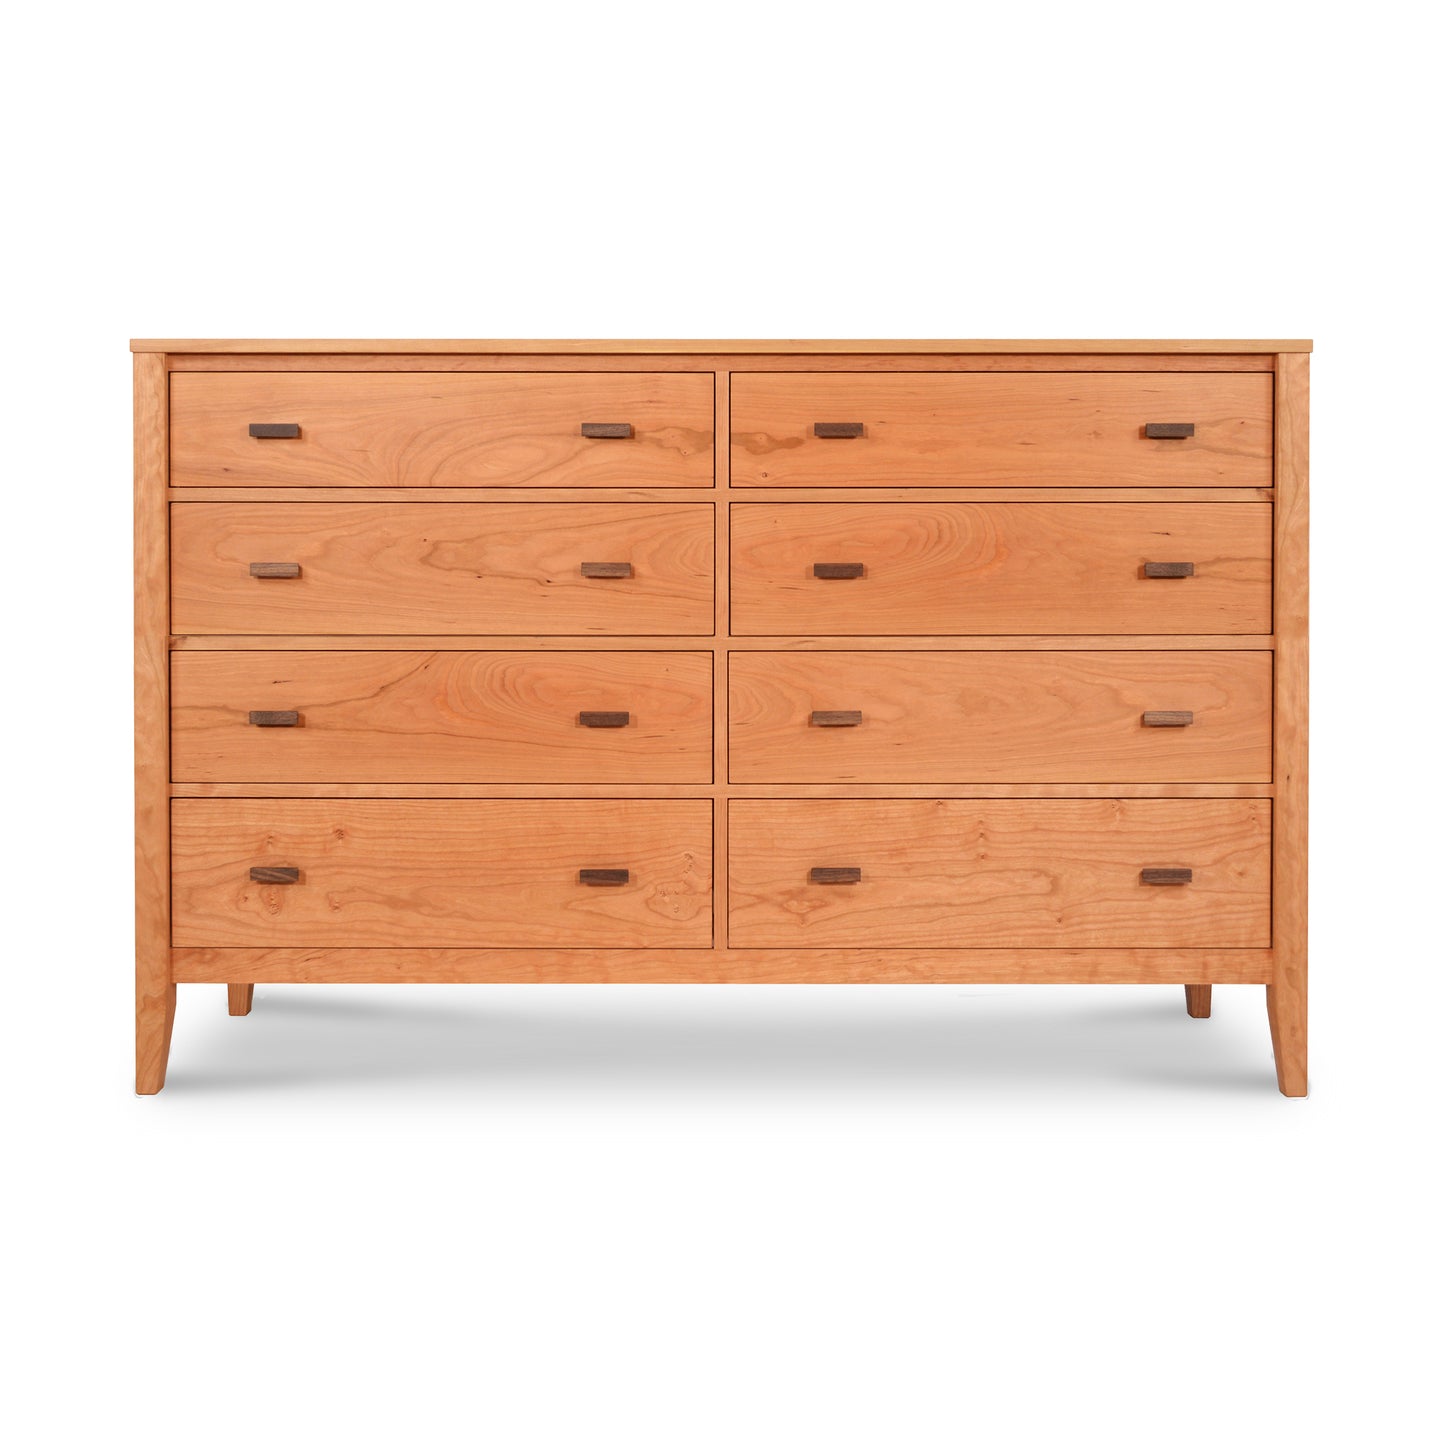 An image of the Maple Corner Woodworks Andover Modern 8-Drawer Dresser, blending traditional flair with a modern design.